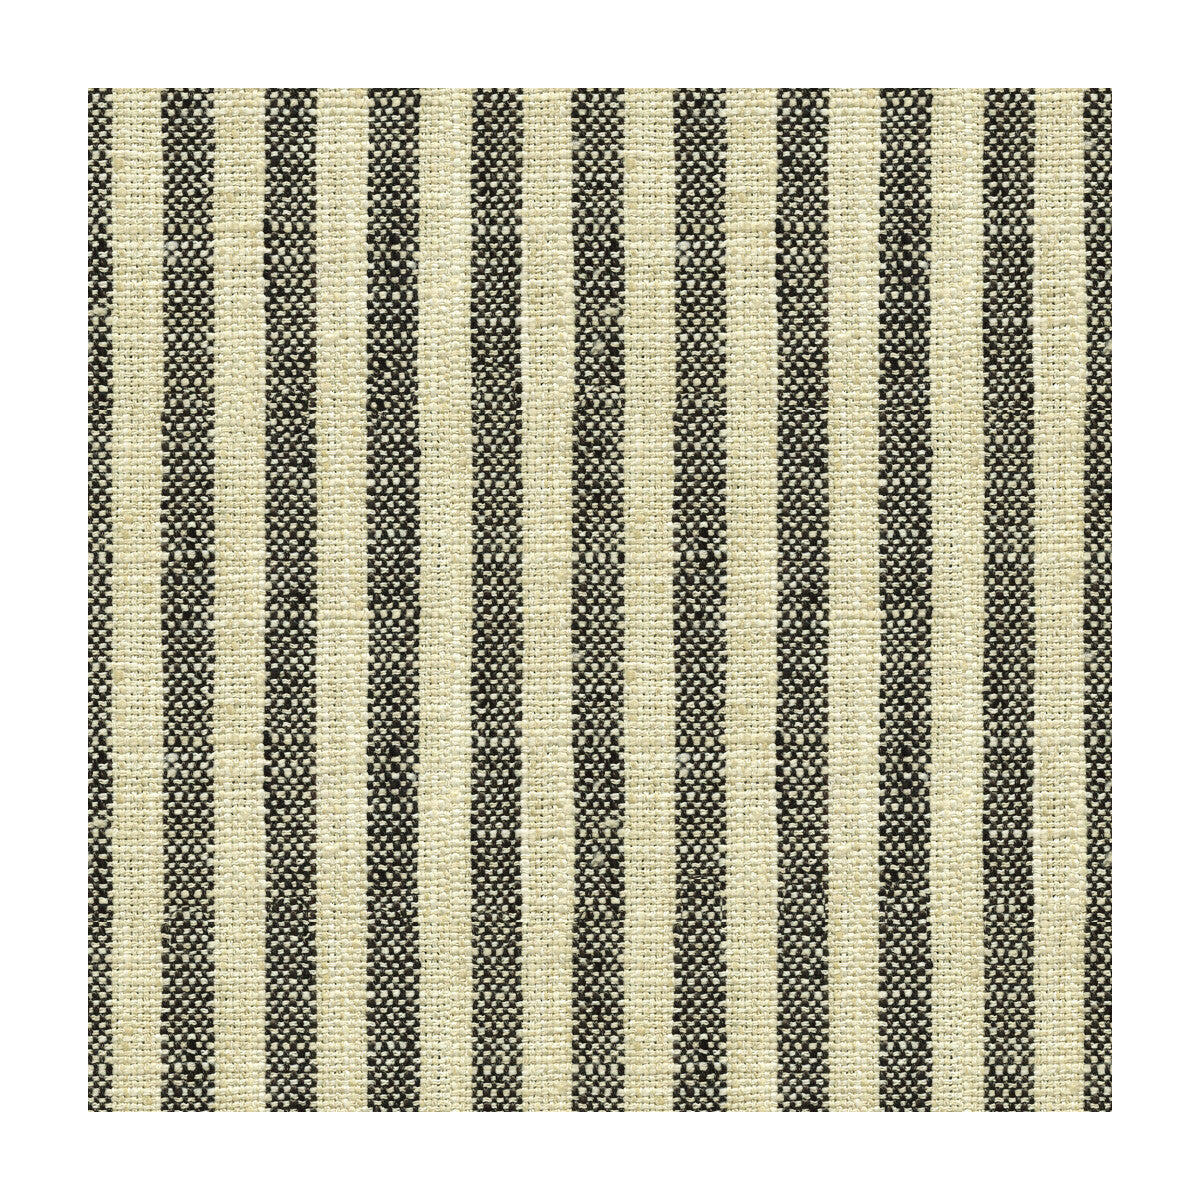 Kravet Basics fabric in 34080-81 color - pattern 34080.81.0 - by Kravet Basics in the Bungalow Chic II collection